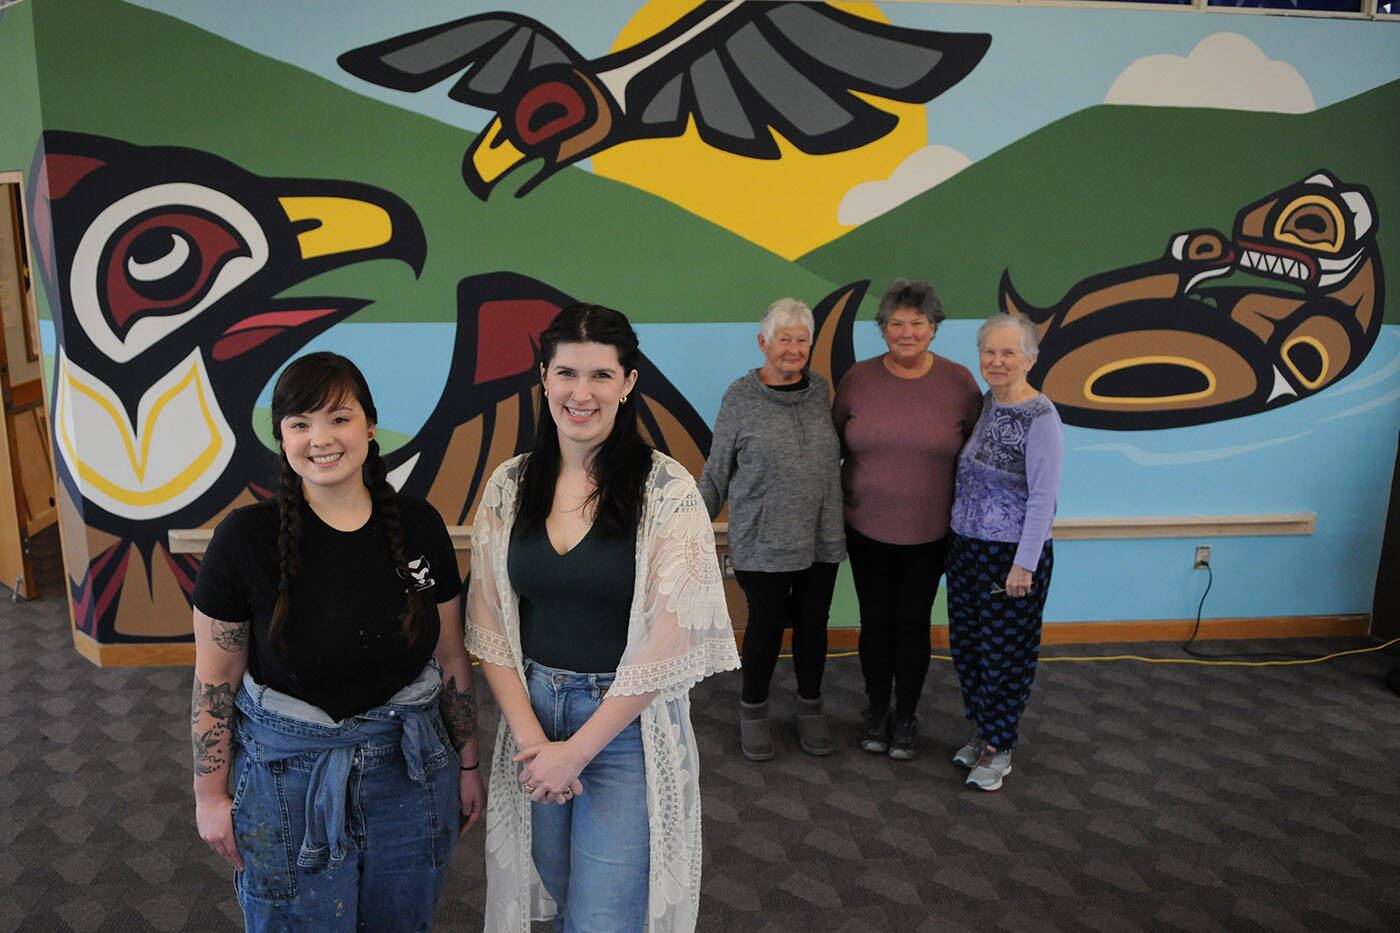 From left, artist Chantelle Trainor-Matties, librarian Kelli Whitehead and members of Friends of the Chilliwack Libraries group Roberta Roxburgh, Terry Hildebrant and Claire Bouchard stand in front of a mural at the Chilliwack Library on Nov. 8, 2022. (Jenna Hauck/ Chilliwack Progress)